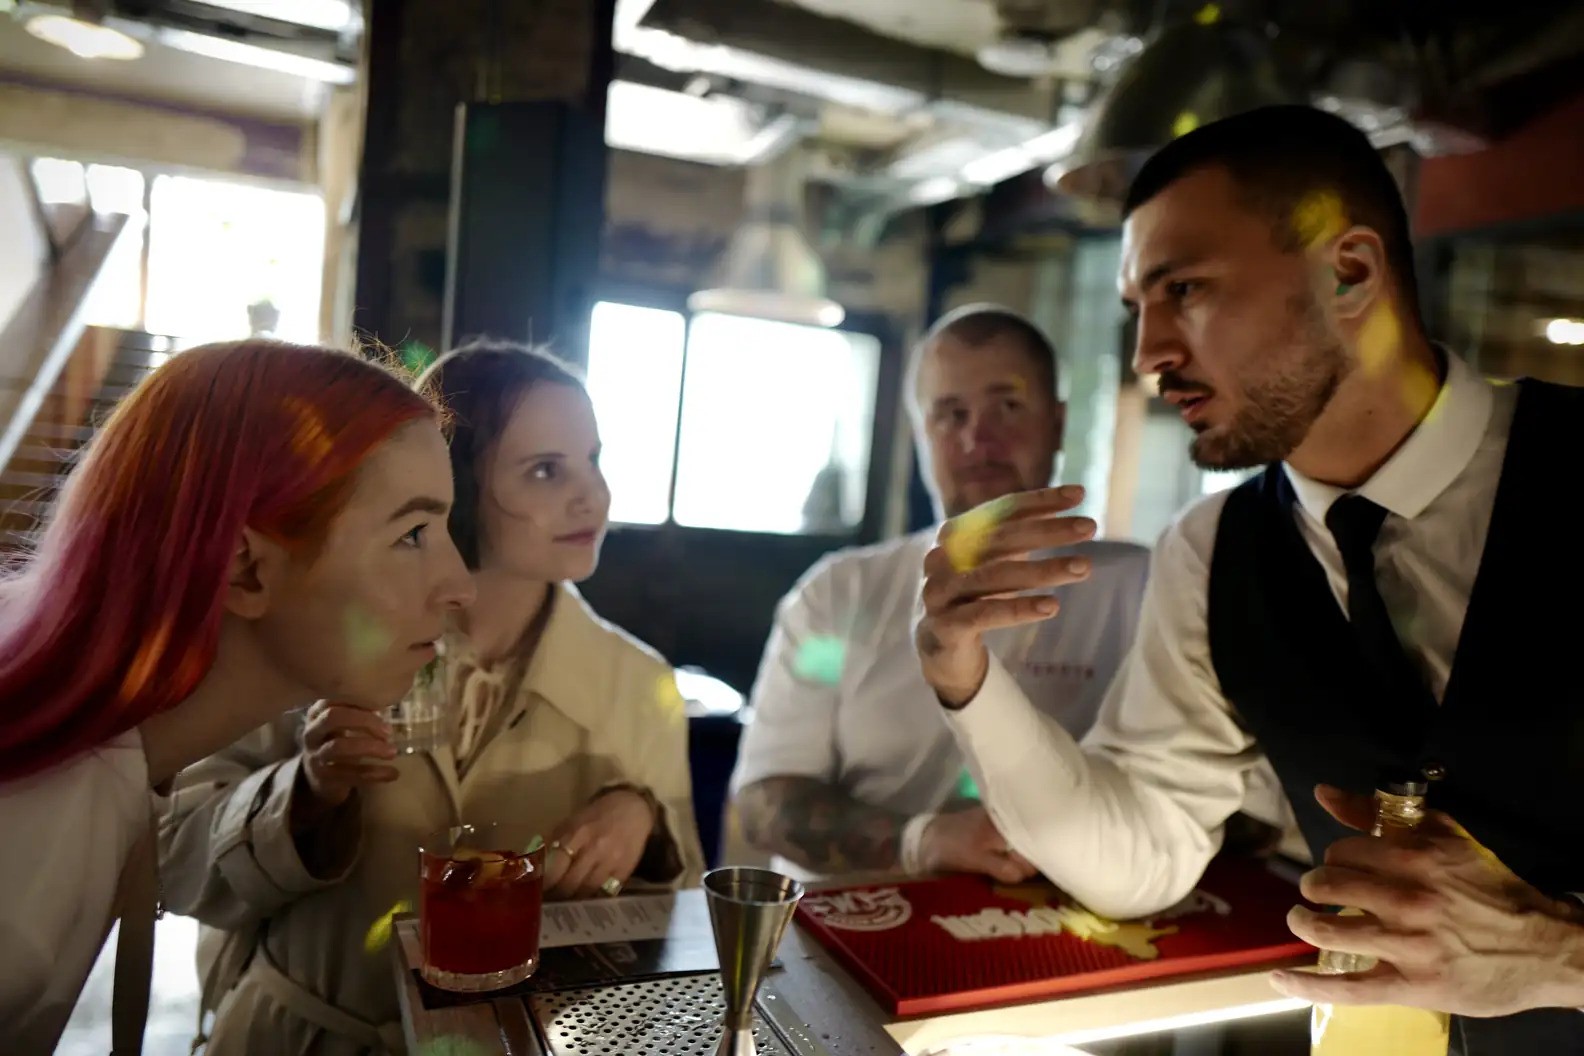 A group of four people — two women and two men, including one wearing a vest and tie — lean forward over a bar in discussion. 